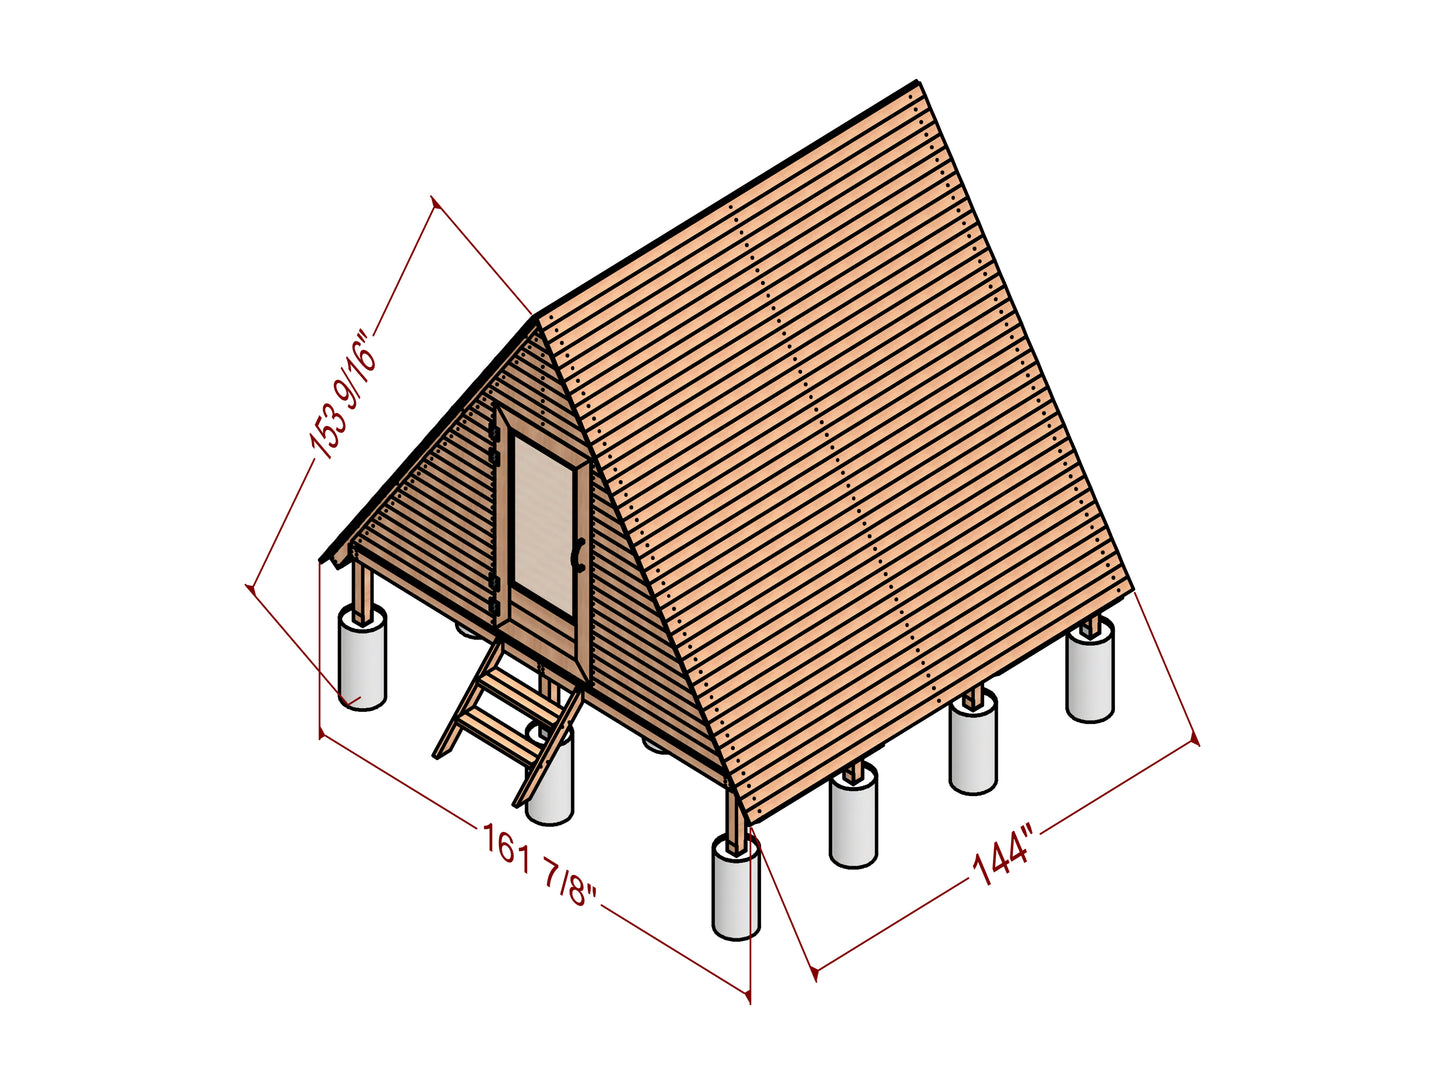 12x12 A frame shed plans, 12x12 playhouse plan, Create Magical Memories with DIY 12x12 Wooden Playhouse Plans | Craftsmanship Meets Imagination